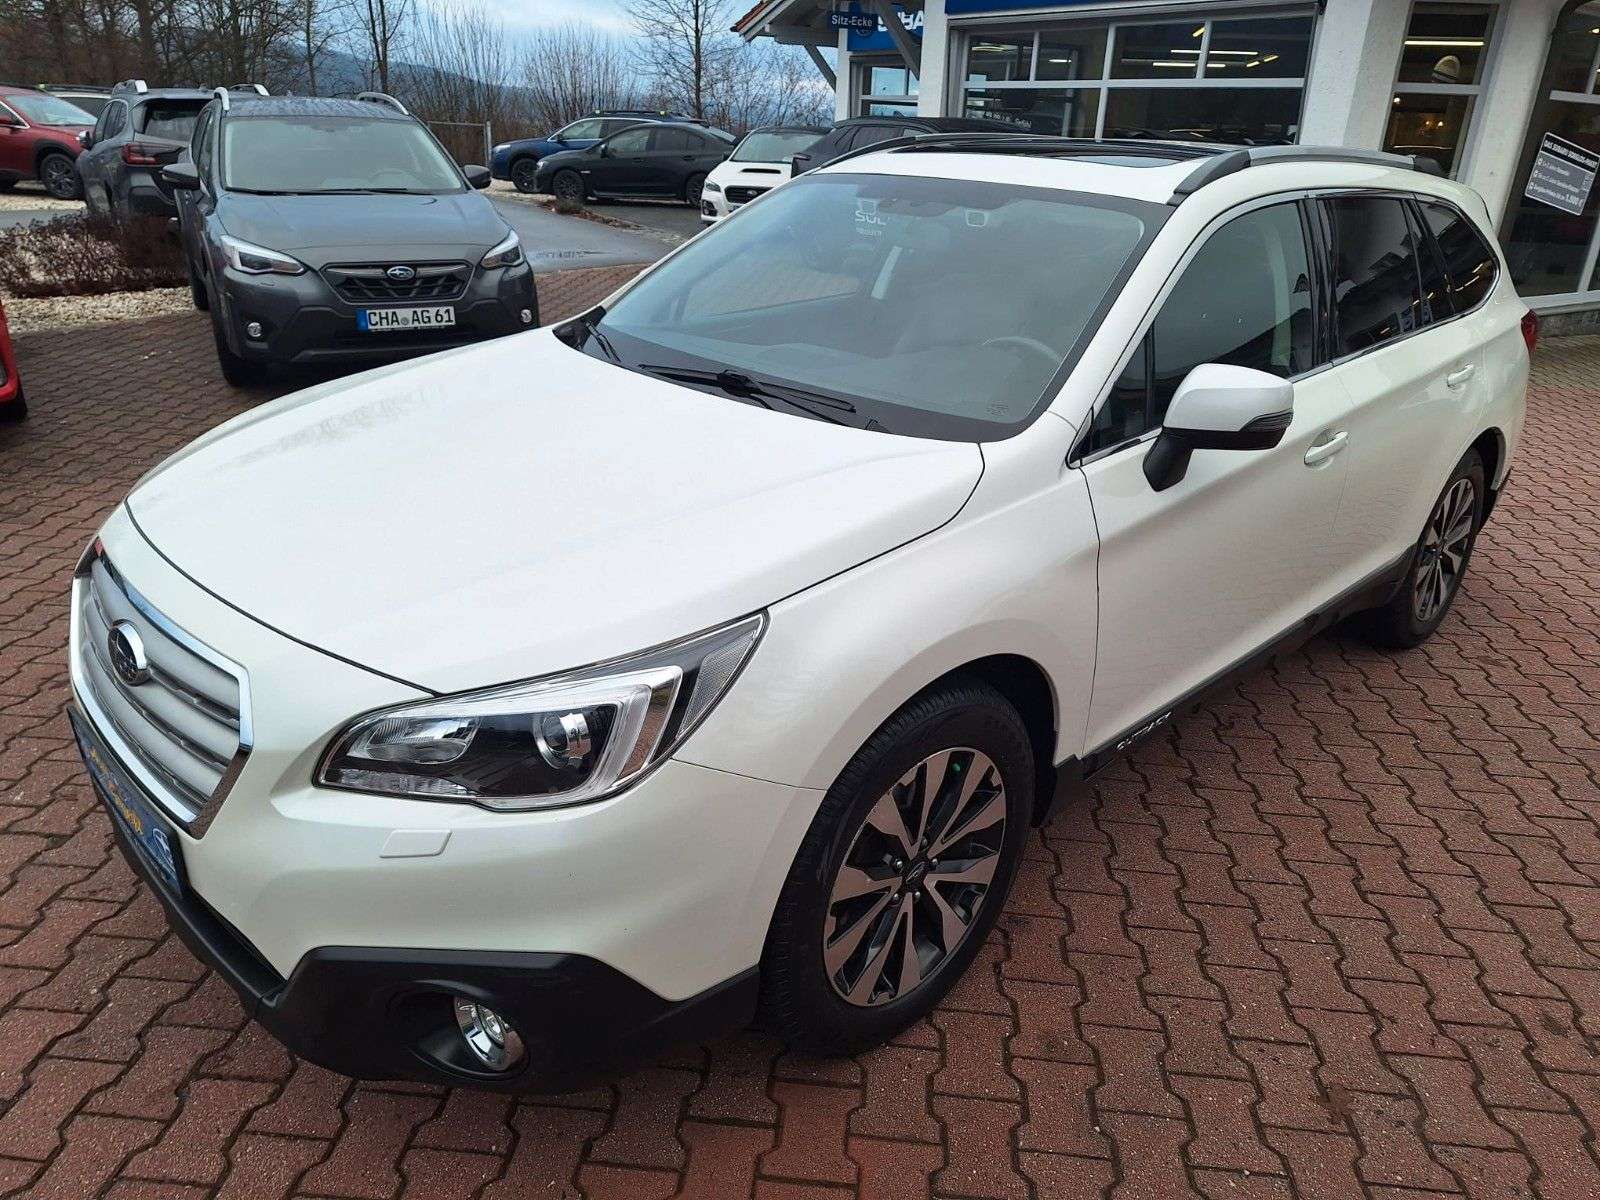 Subaru OUTBACK Station wagon in White used in Bad Kötzting for € 15,900.-